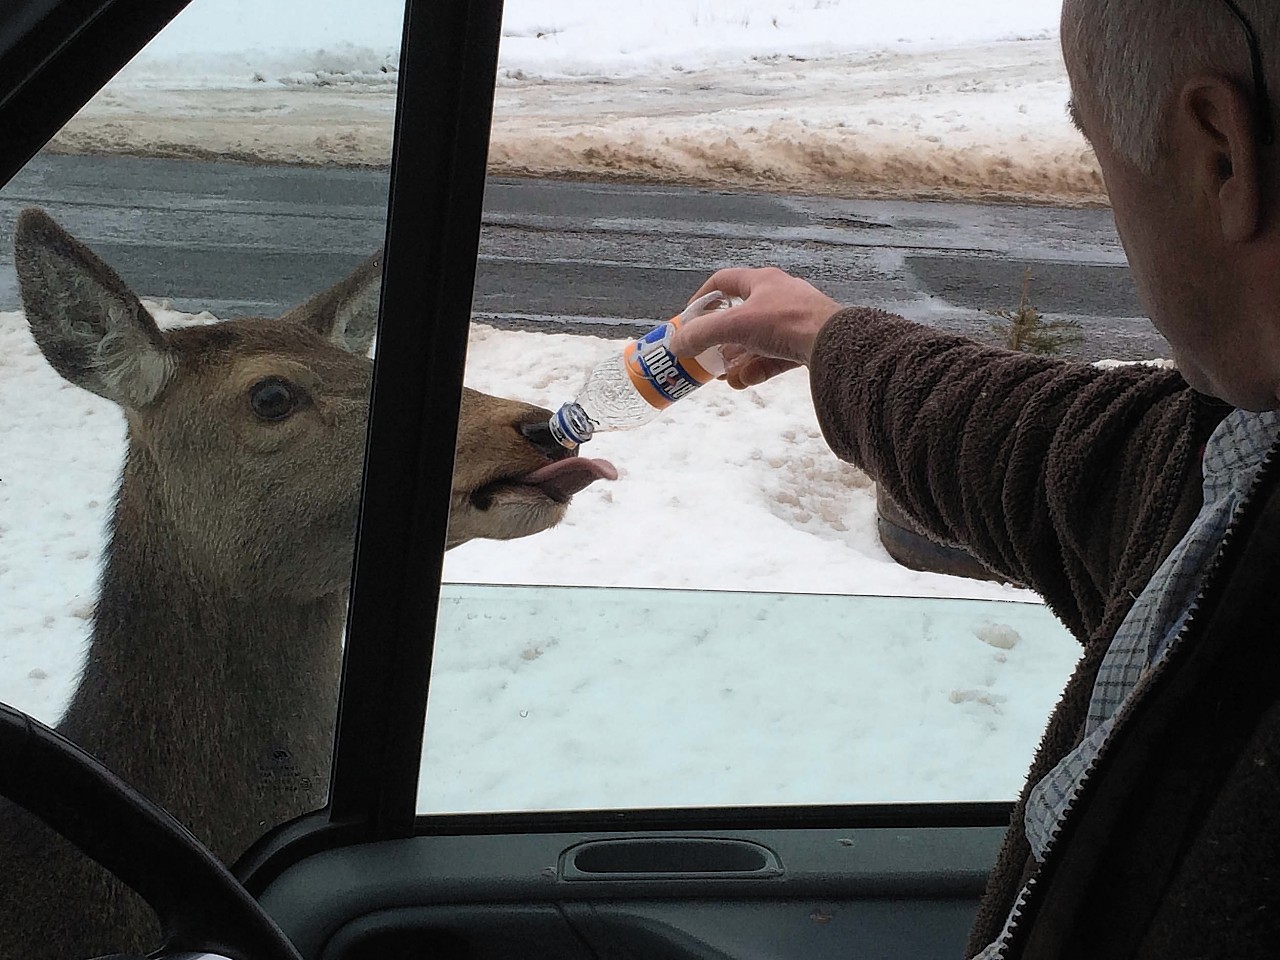 The deer polished off the cheese and onion crisps and chocolate before enjoying a bottle of Irn Bru